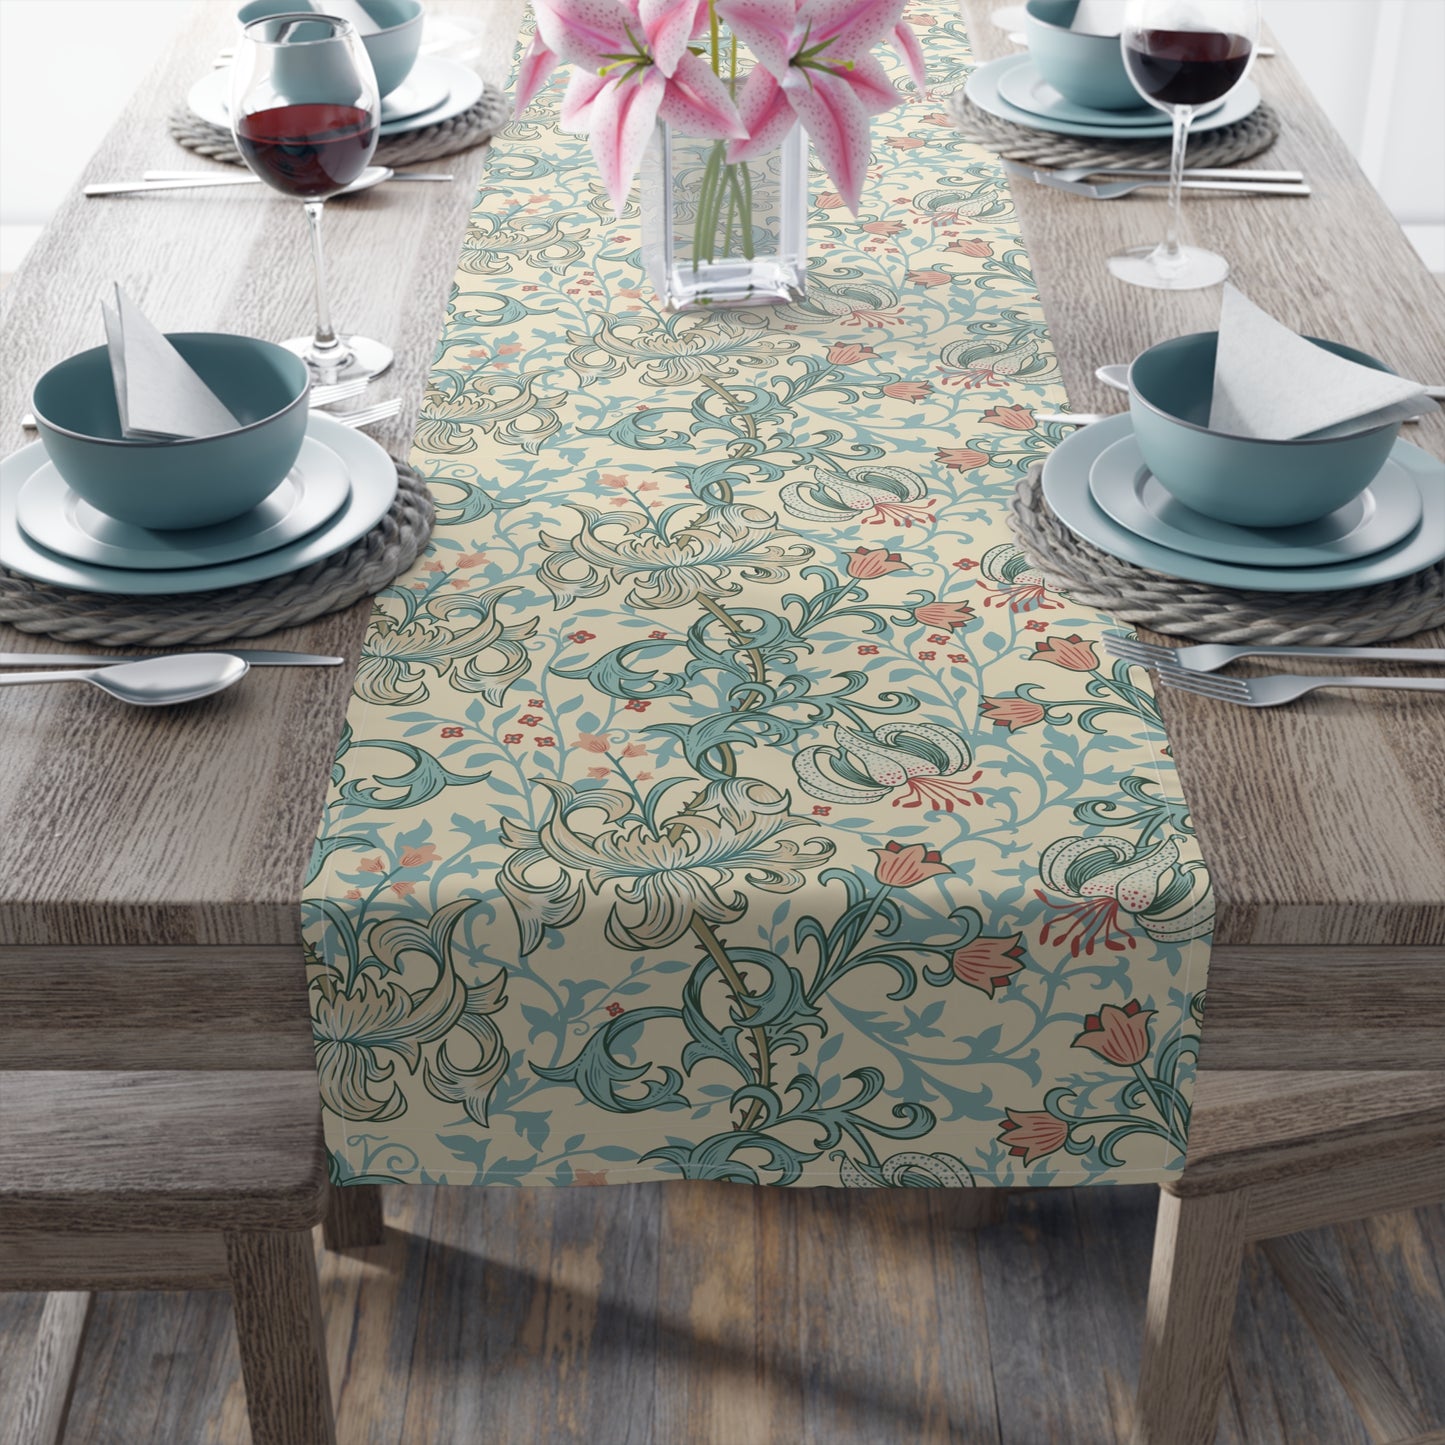 william-morris-co-table-runner-golden-lily-collection-mineral-7